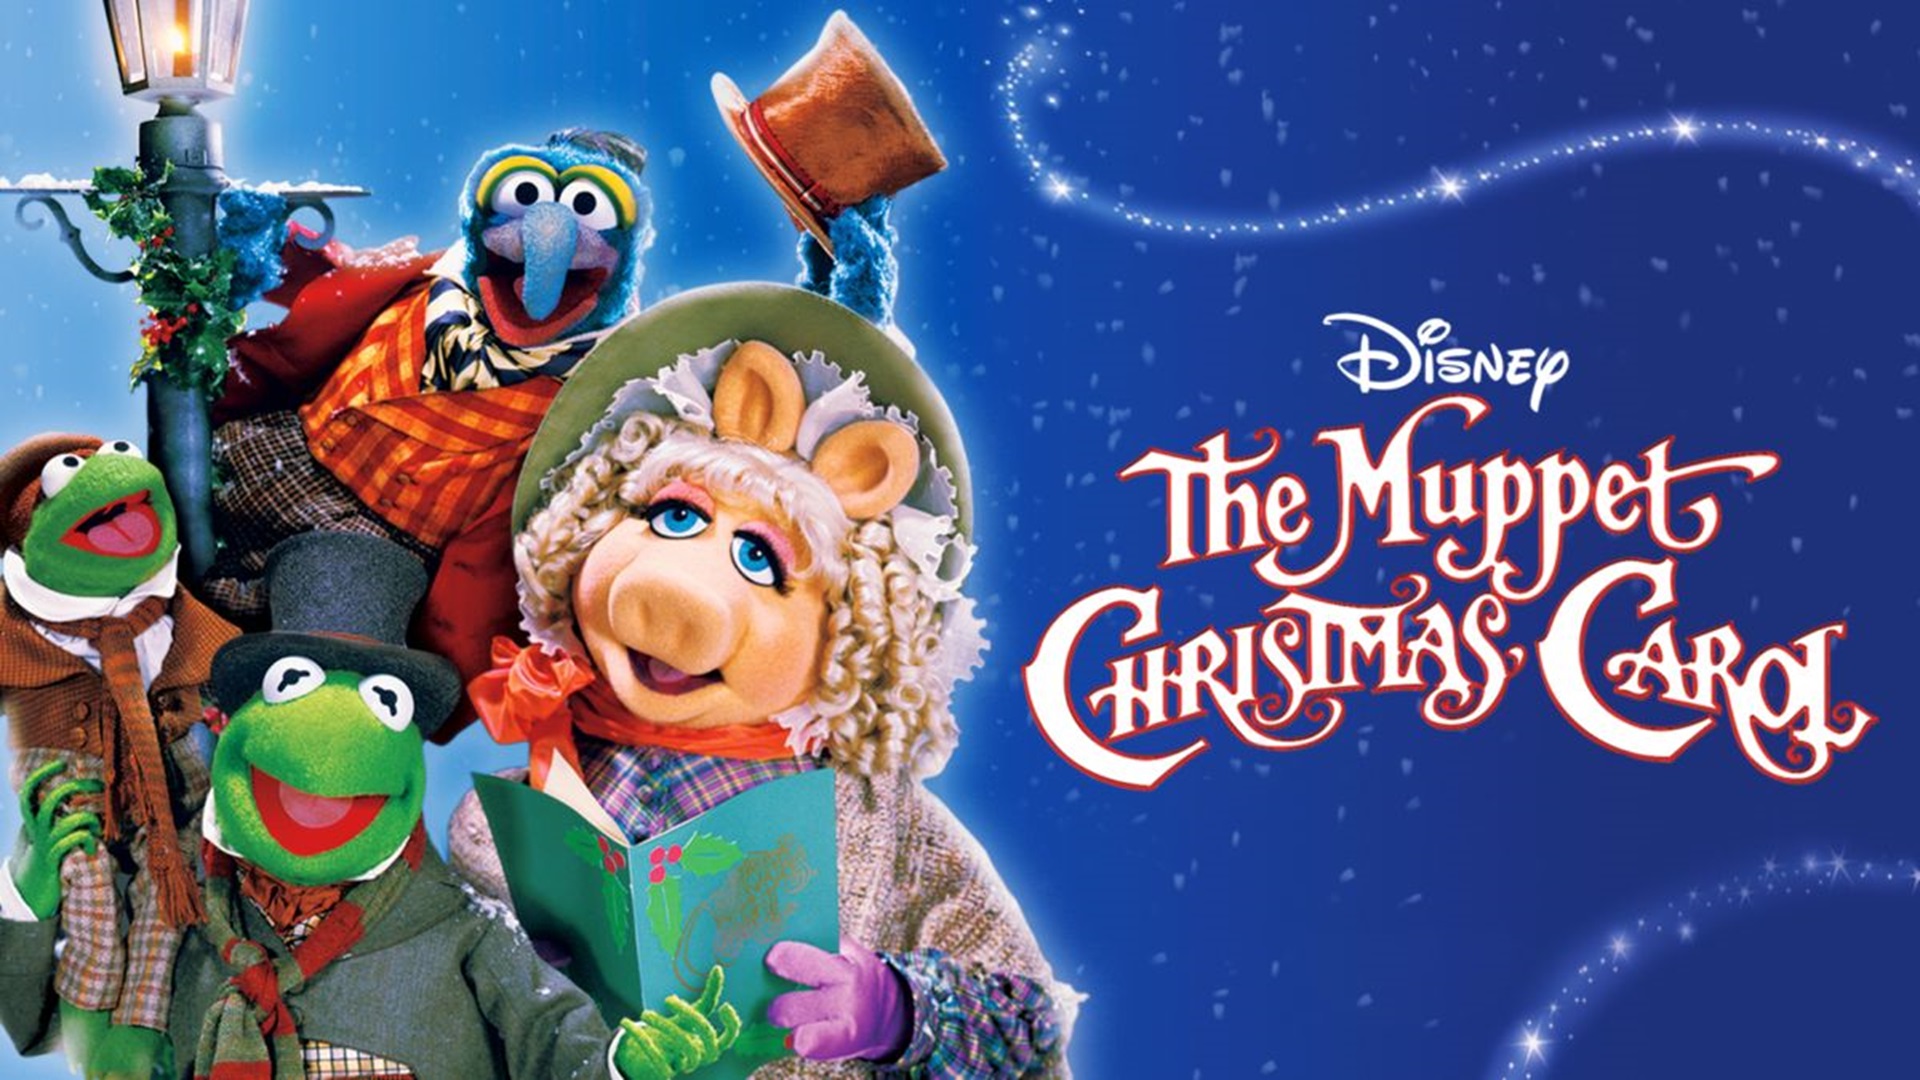 <p>This 1992 film is a retelling of the classic Dickens tale of Ebenezer Scrooge...but featuring everyone's favorite puppets, the Muppets! An excellent film for all ages, the kids will delight in the silliness of the Muppets, and parents will enjoy the nostalgia.</p>